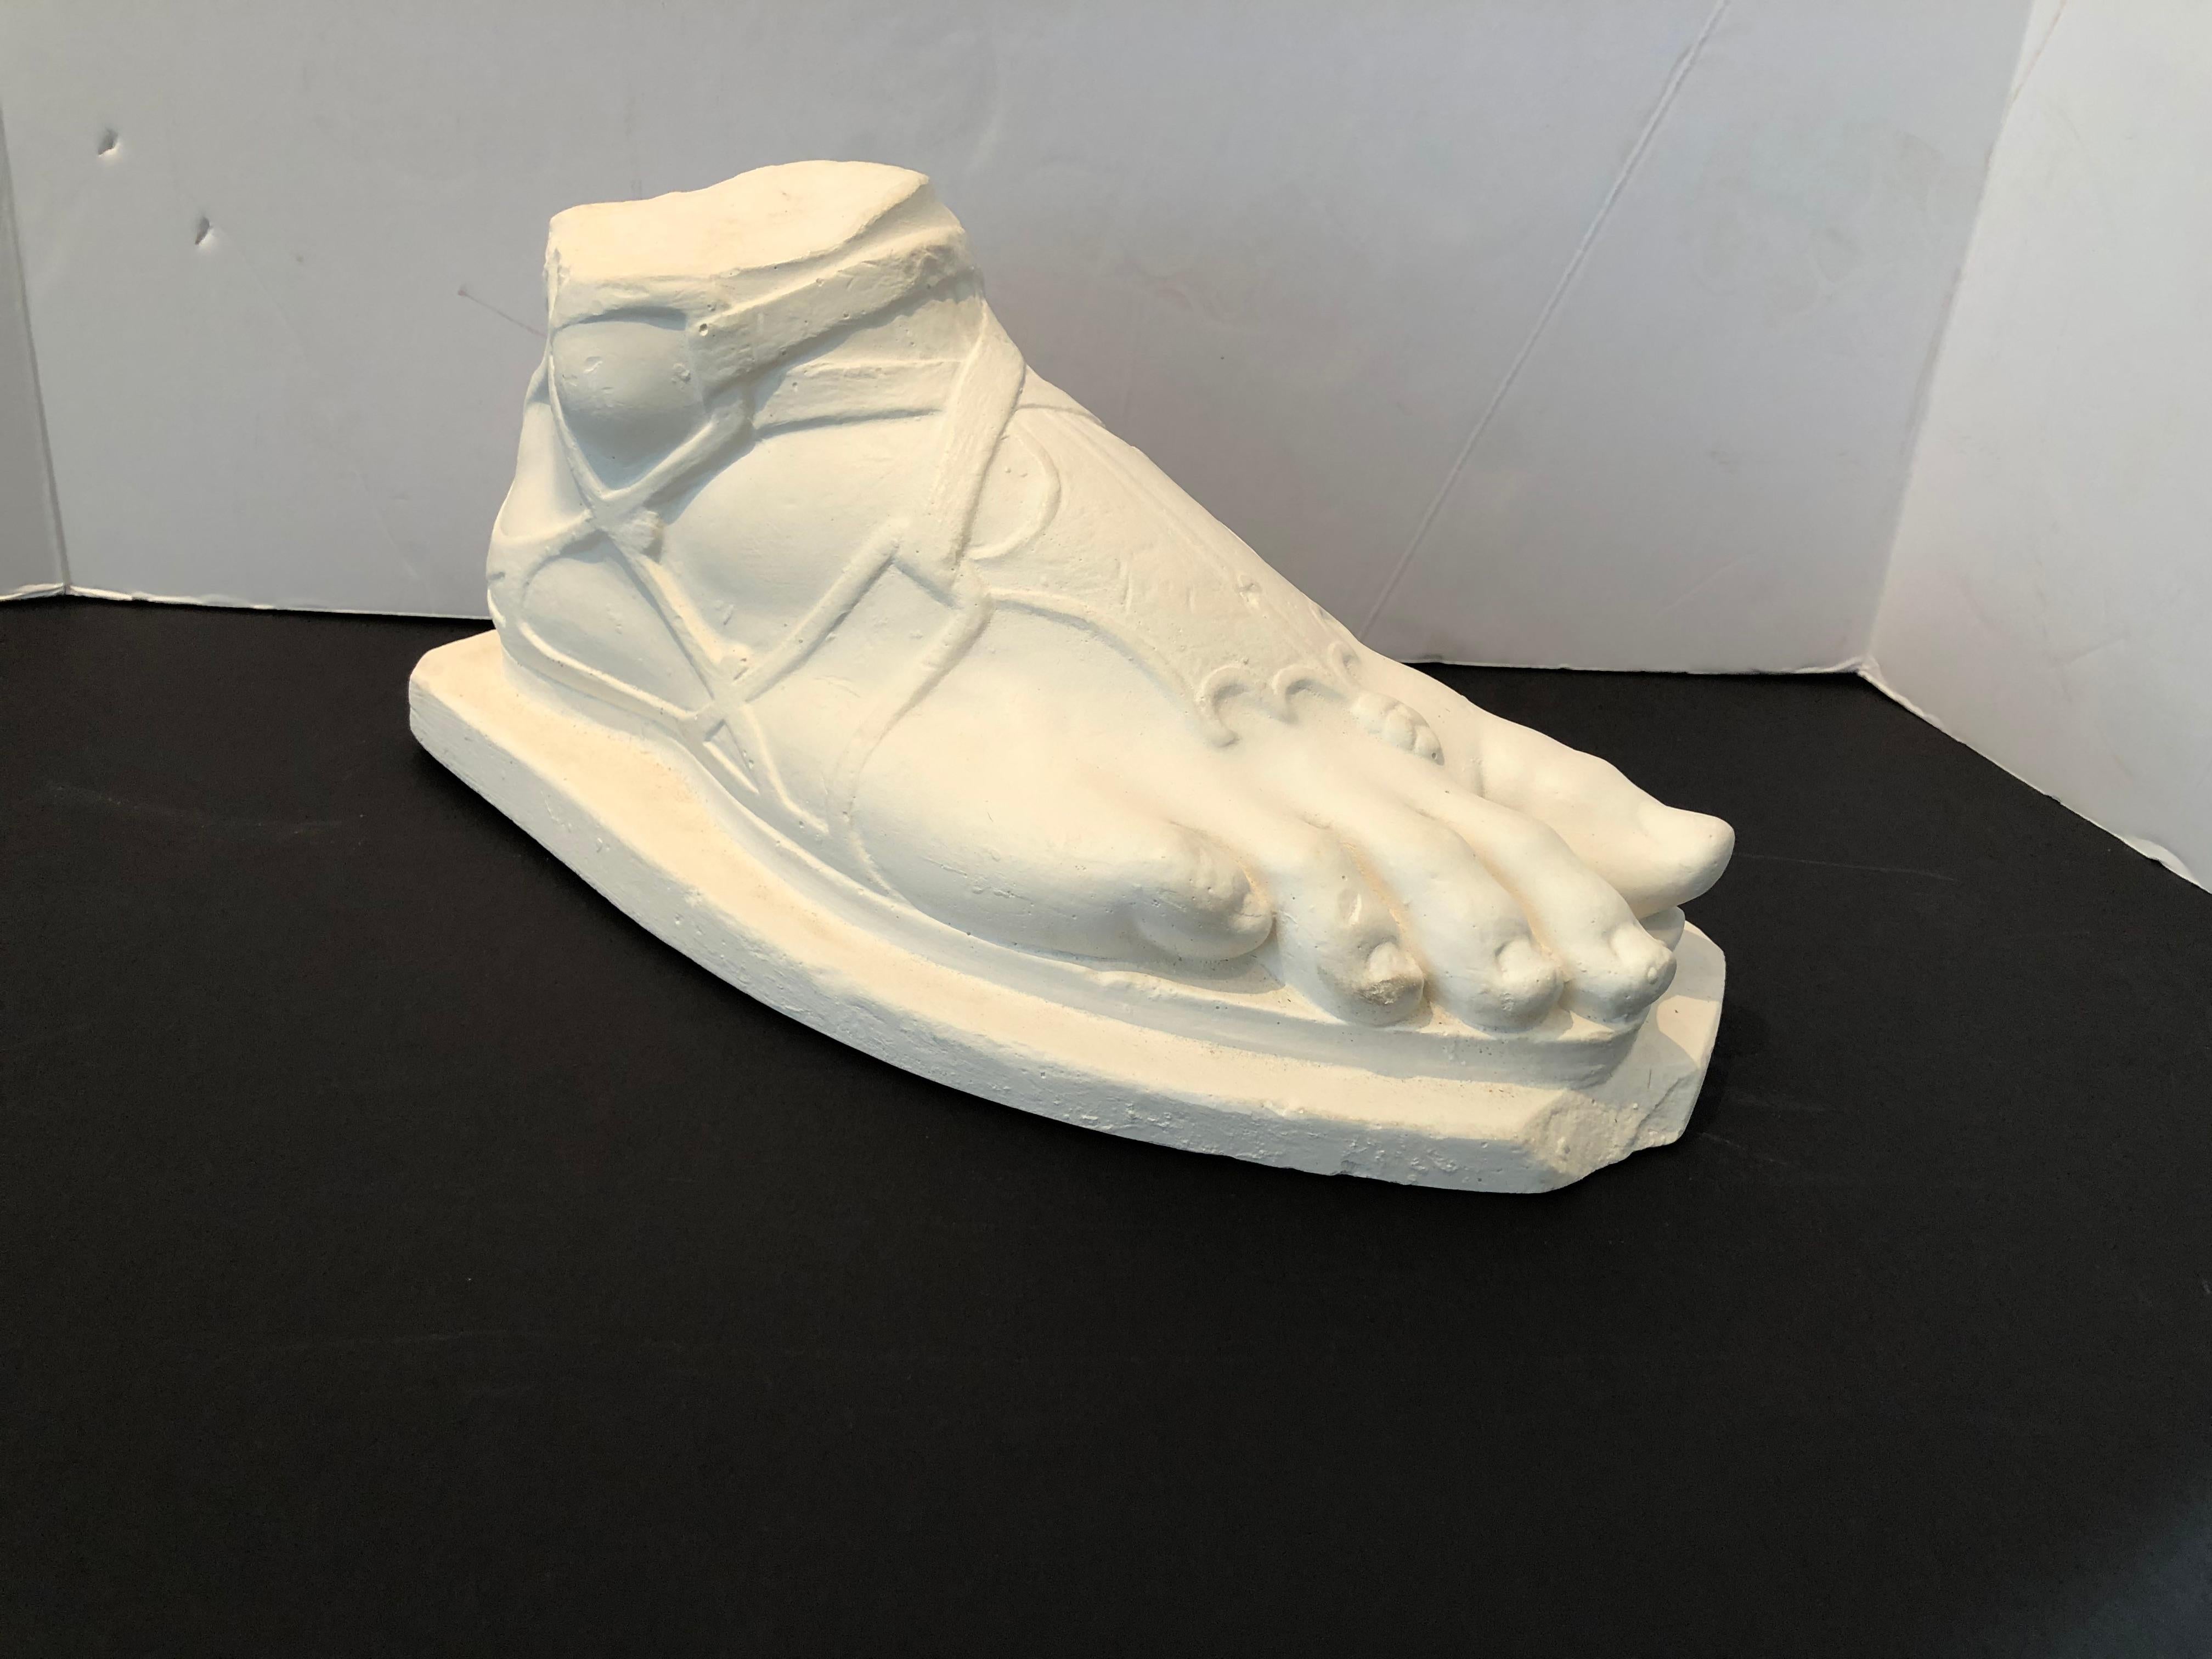 A plaster cast sculpture of the foot of Hermès, after the antique, signed on the side “D Brucciani & Co London